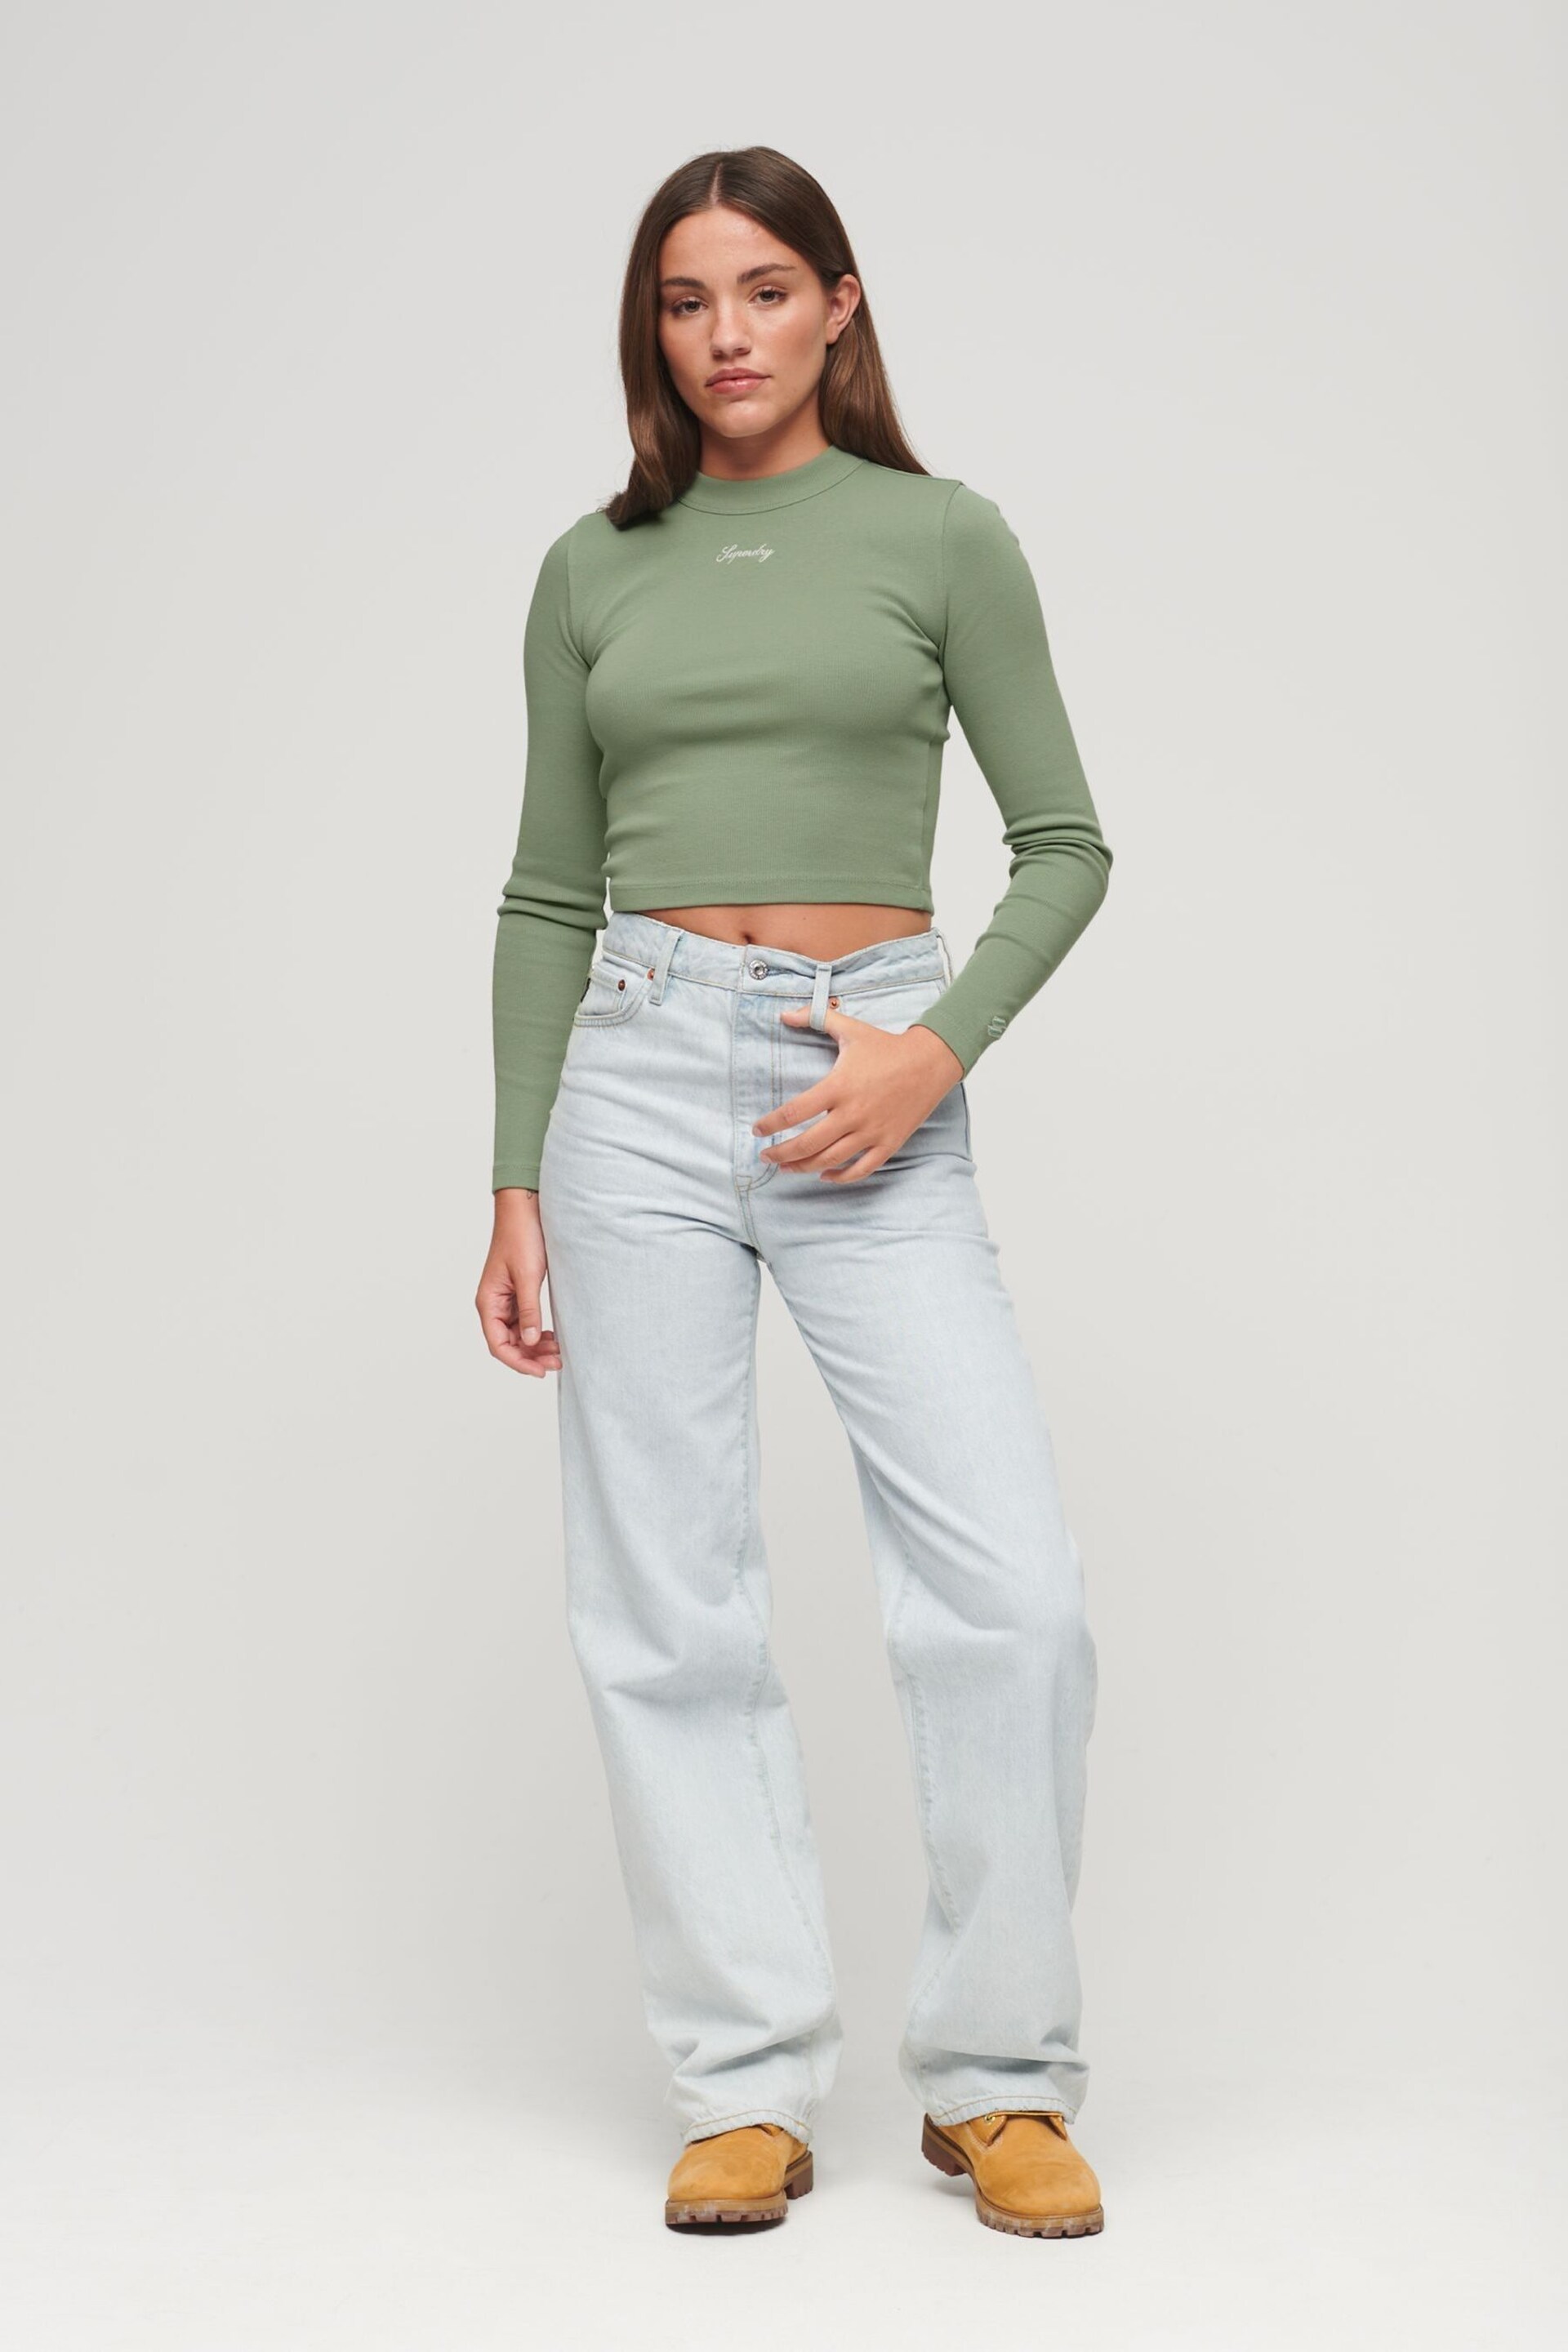 Superdry Light Green Rib Long Sleeve Fitted Top - Image 2 of 6